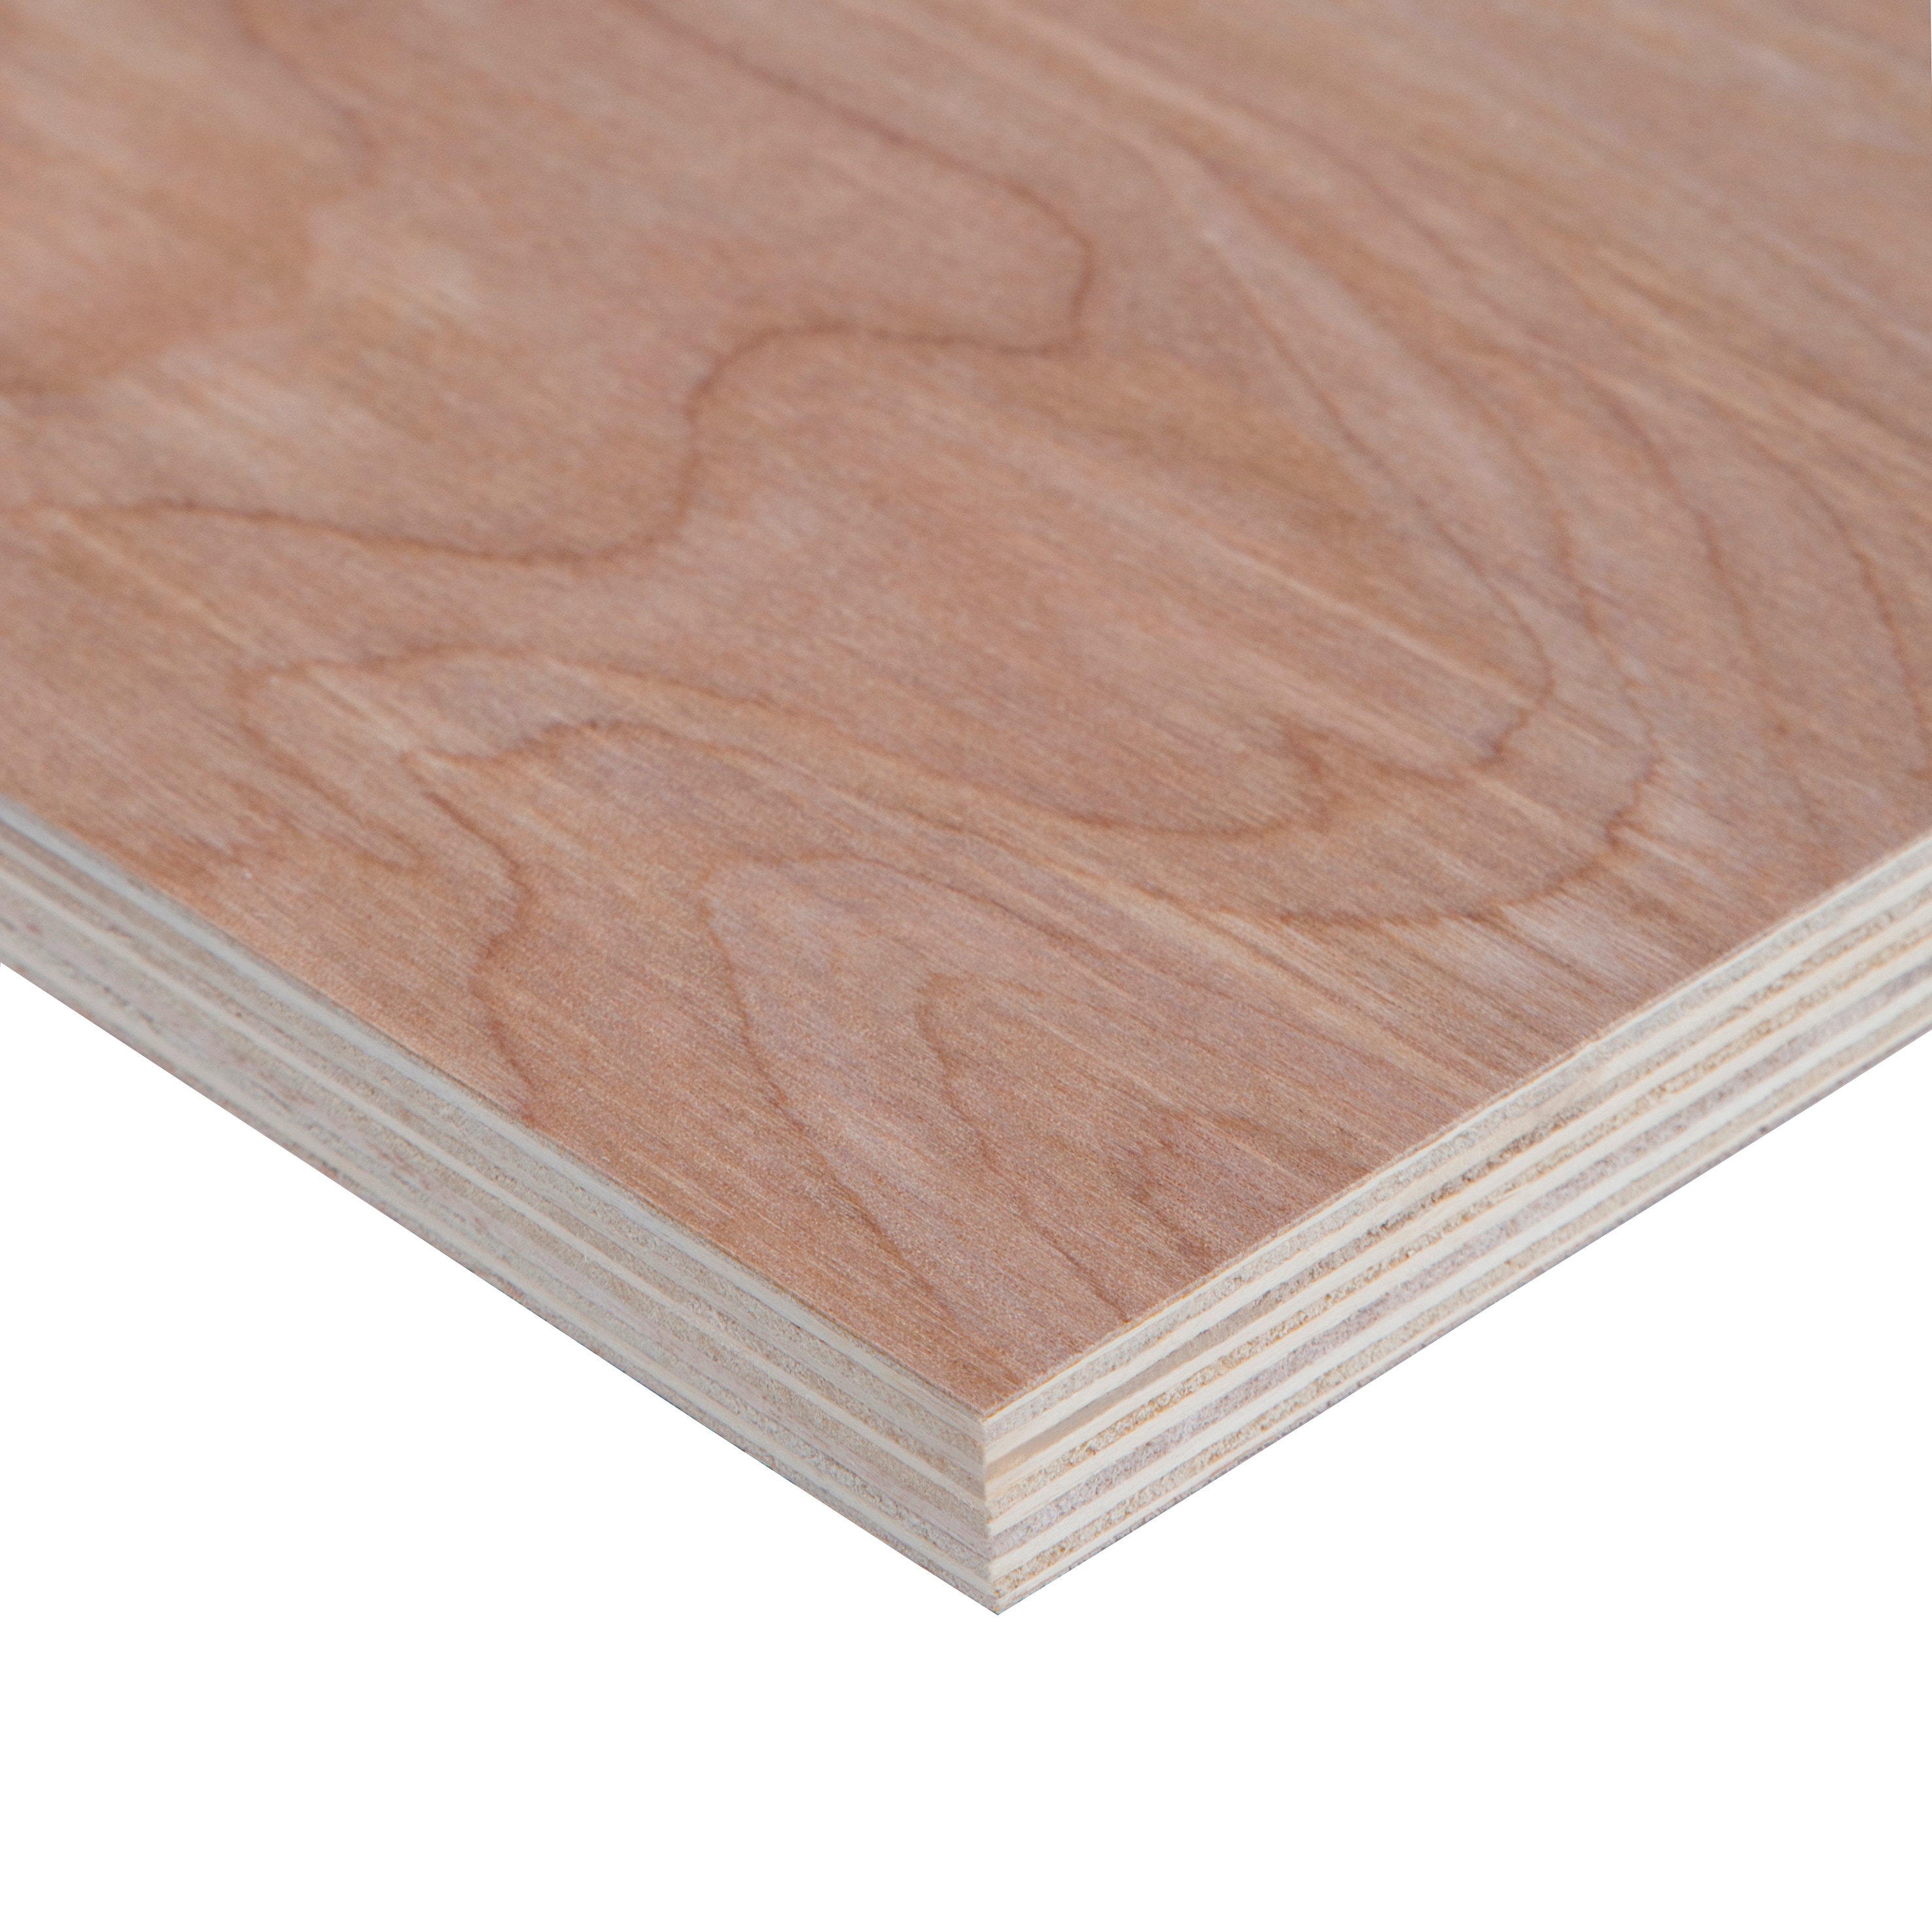 Wholesale 4x8 laminated plywood For Light And Flexible Wood